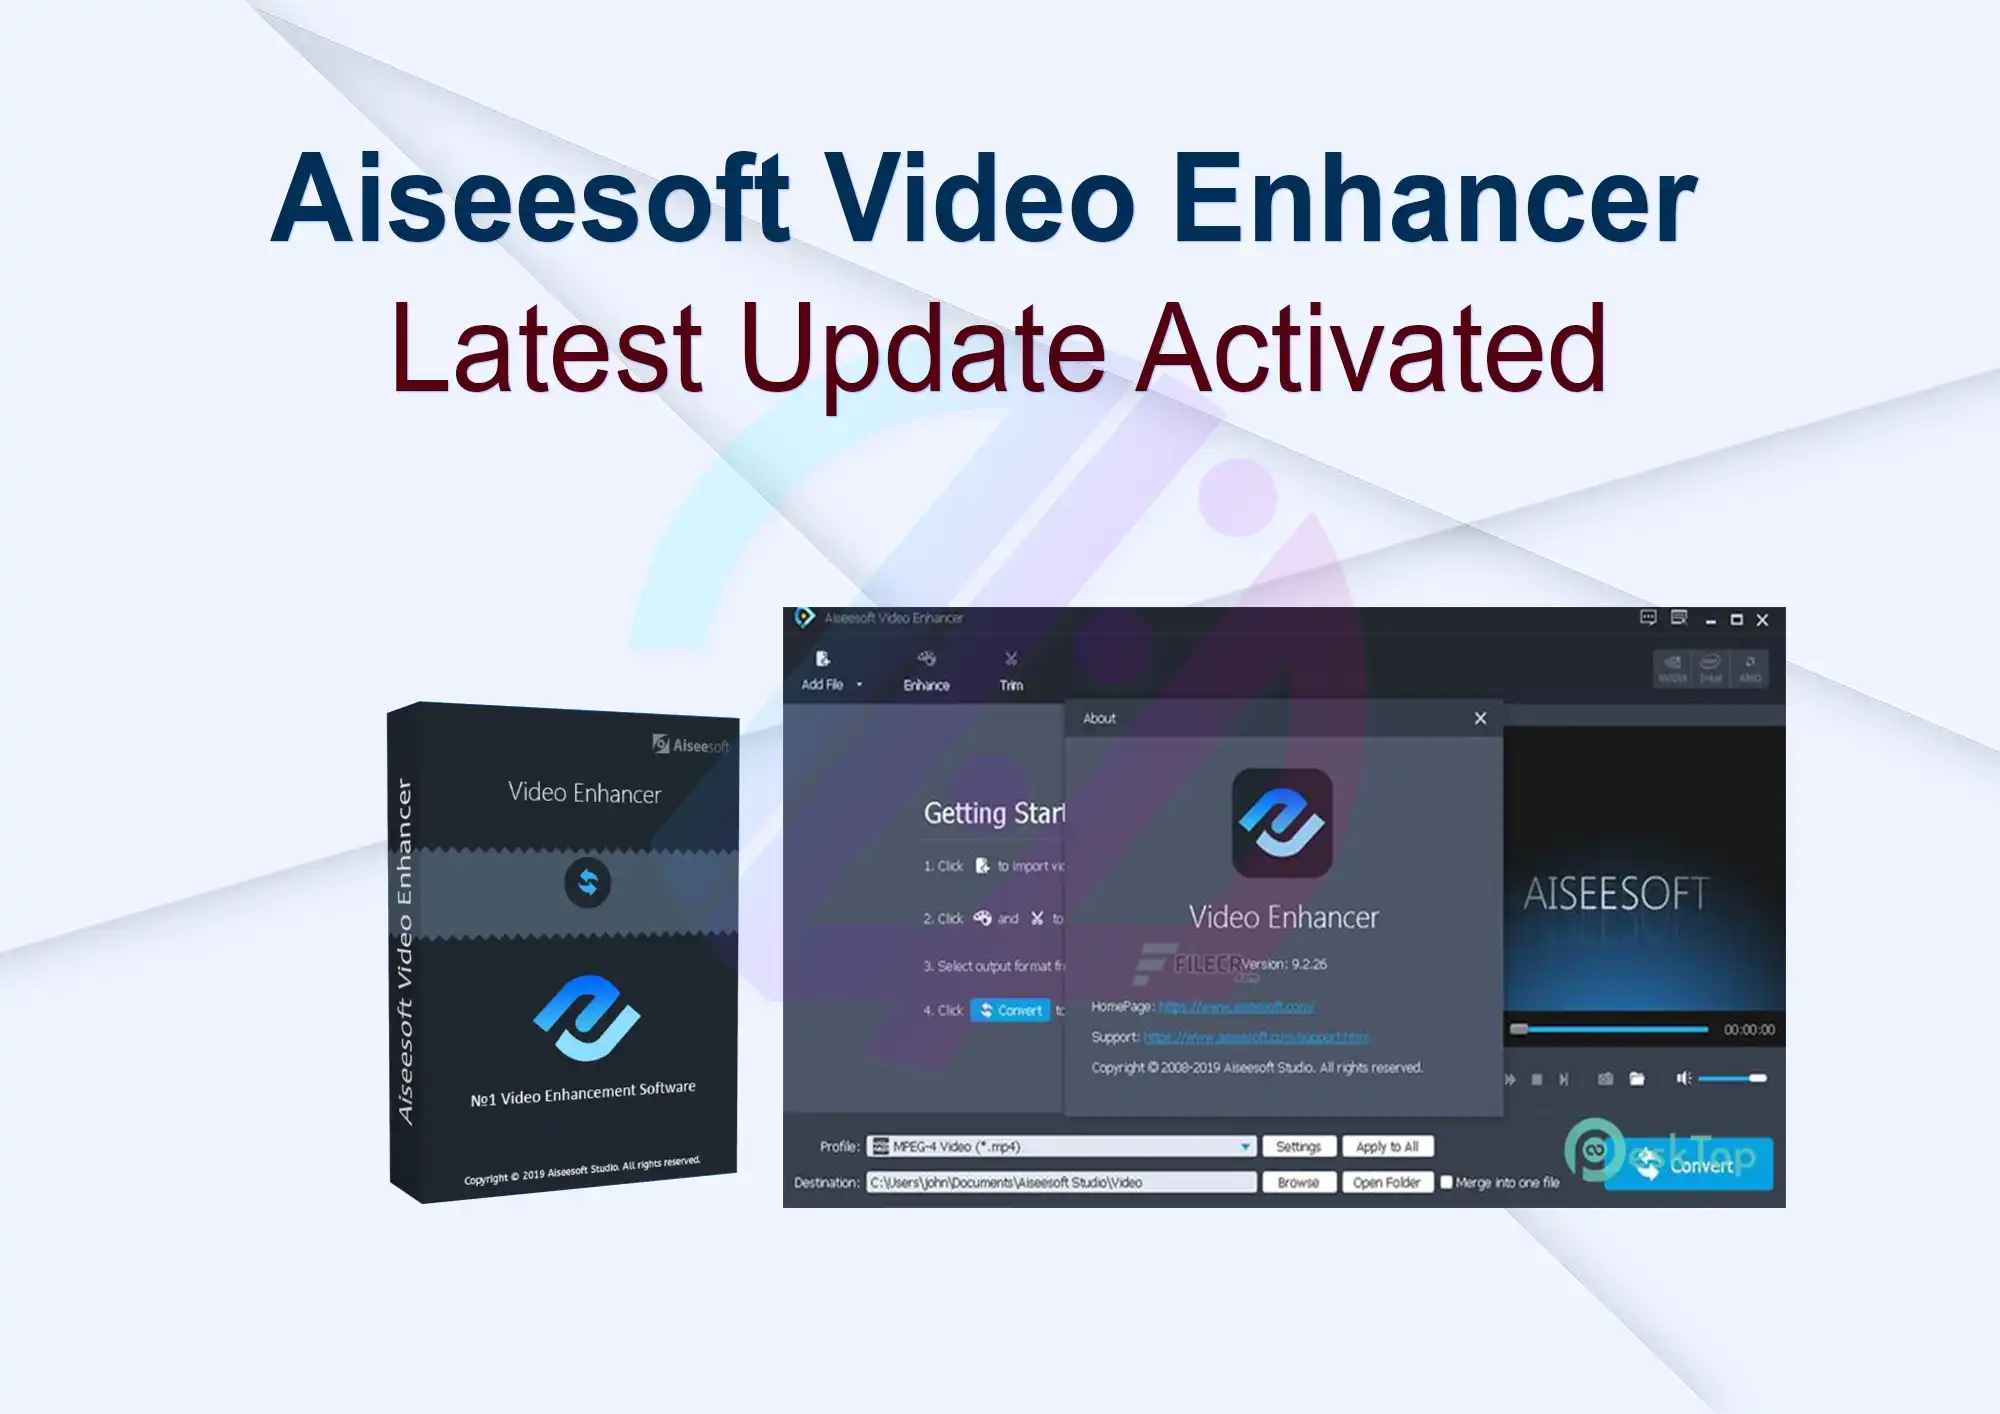 Aiseesoft Video Enhancer Latest Update Activated